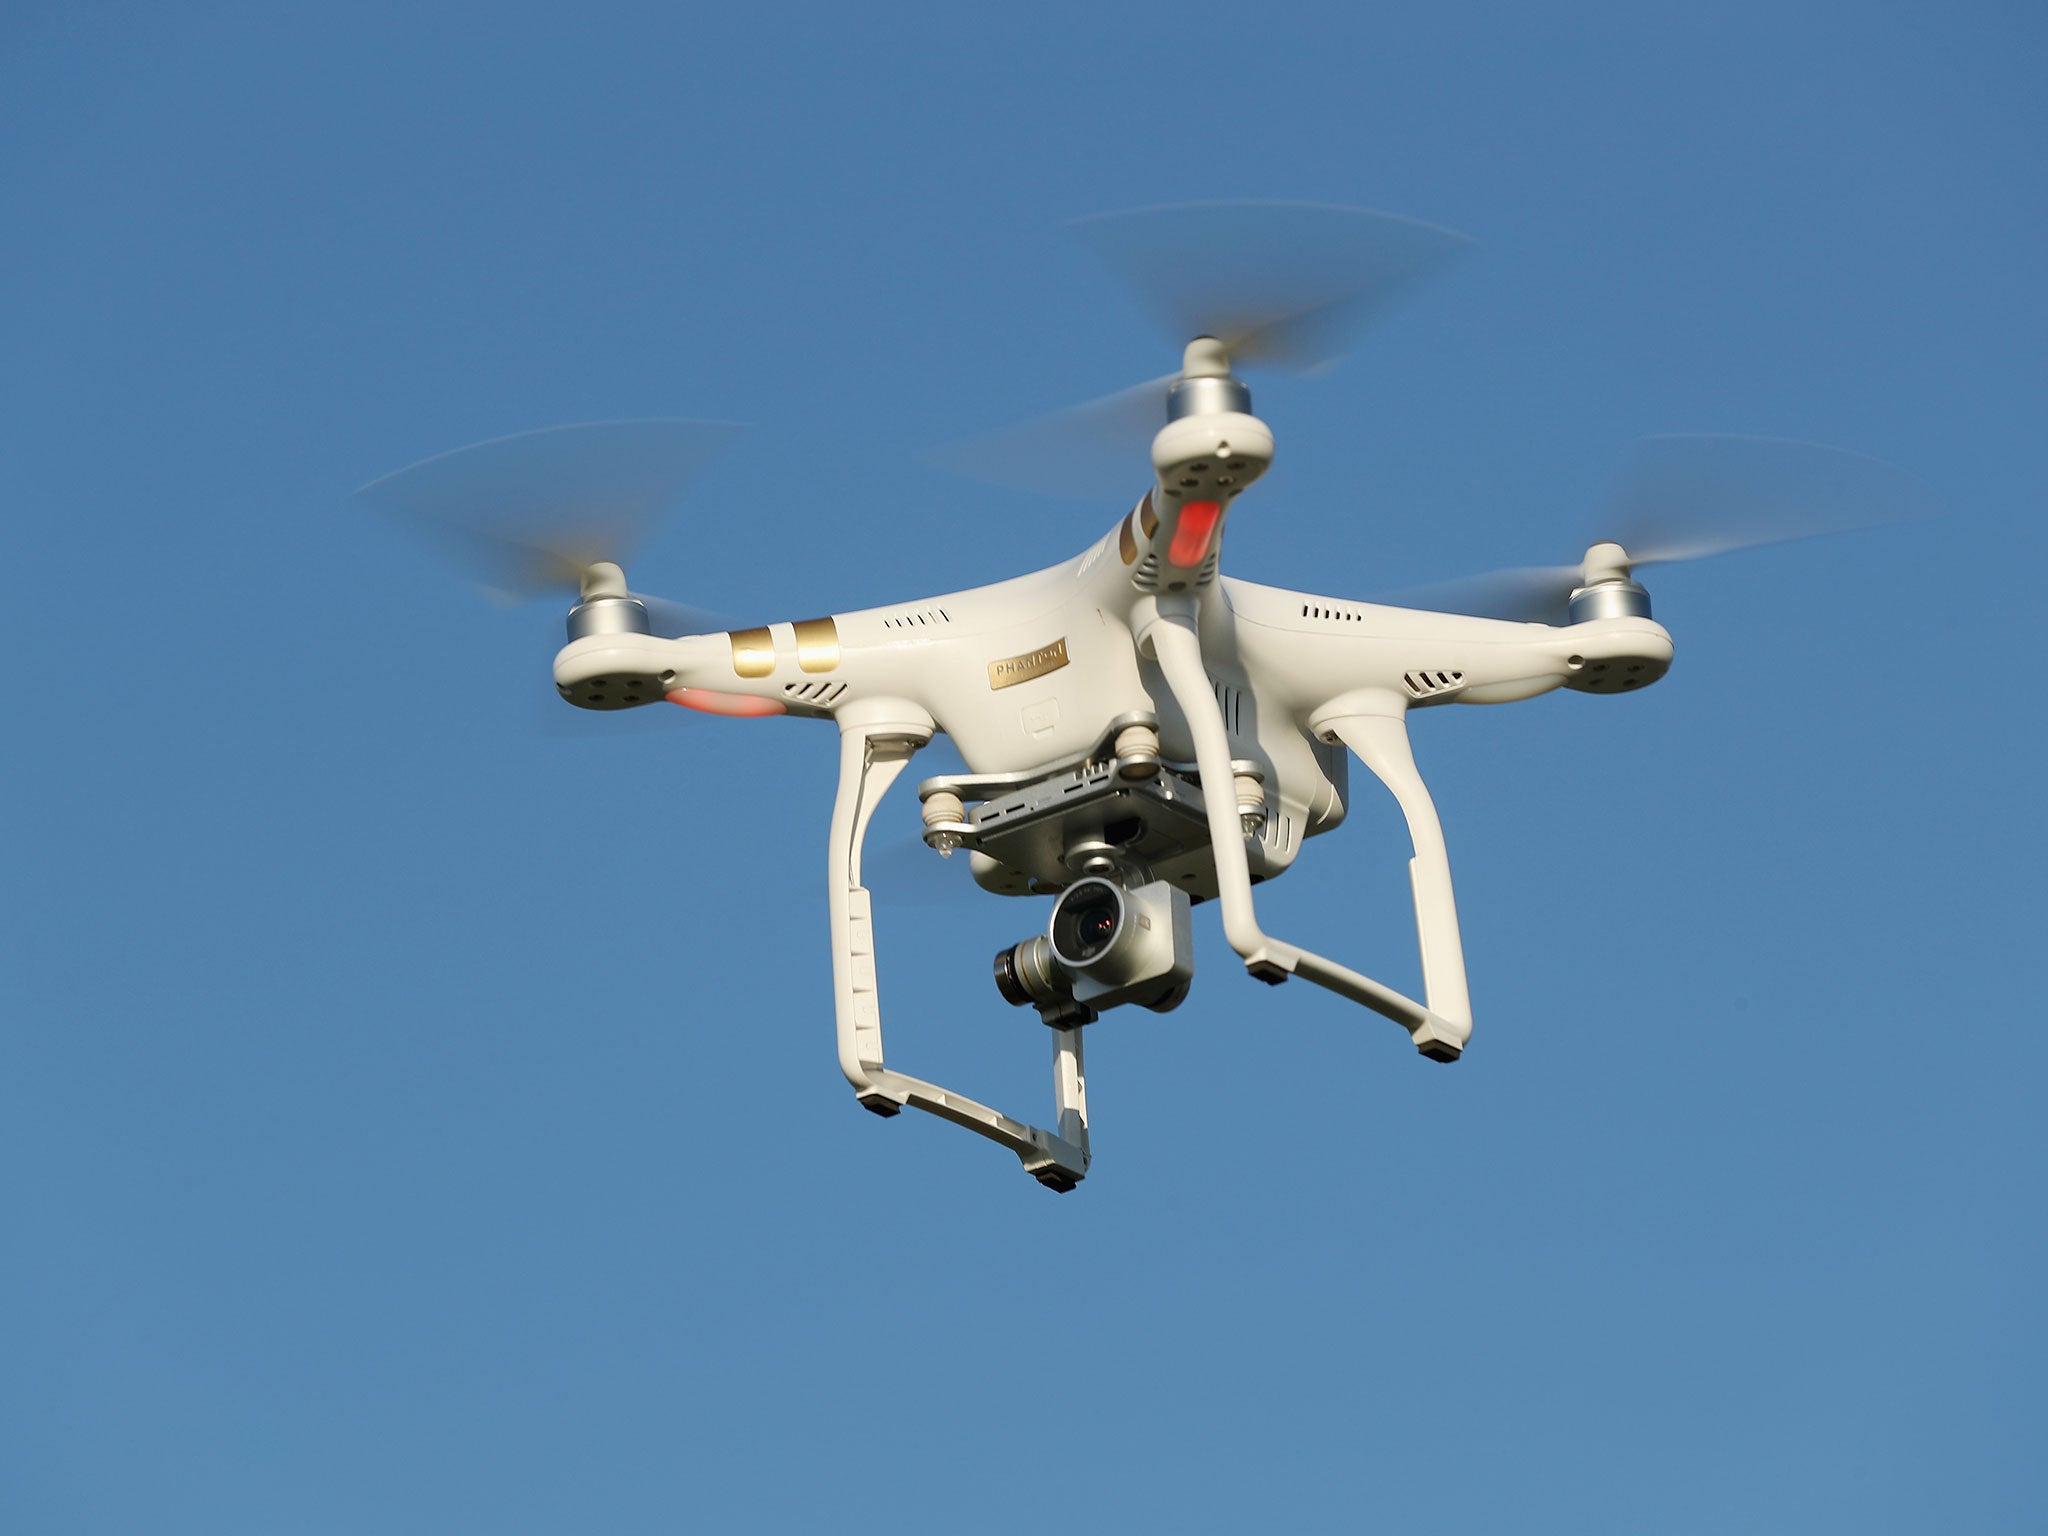 In July a drone put 130 lives at risk when it passed above the wing of an approaching plane